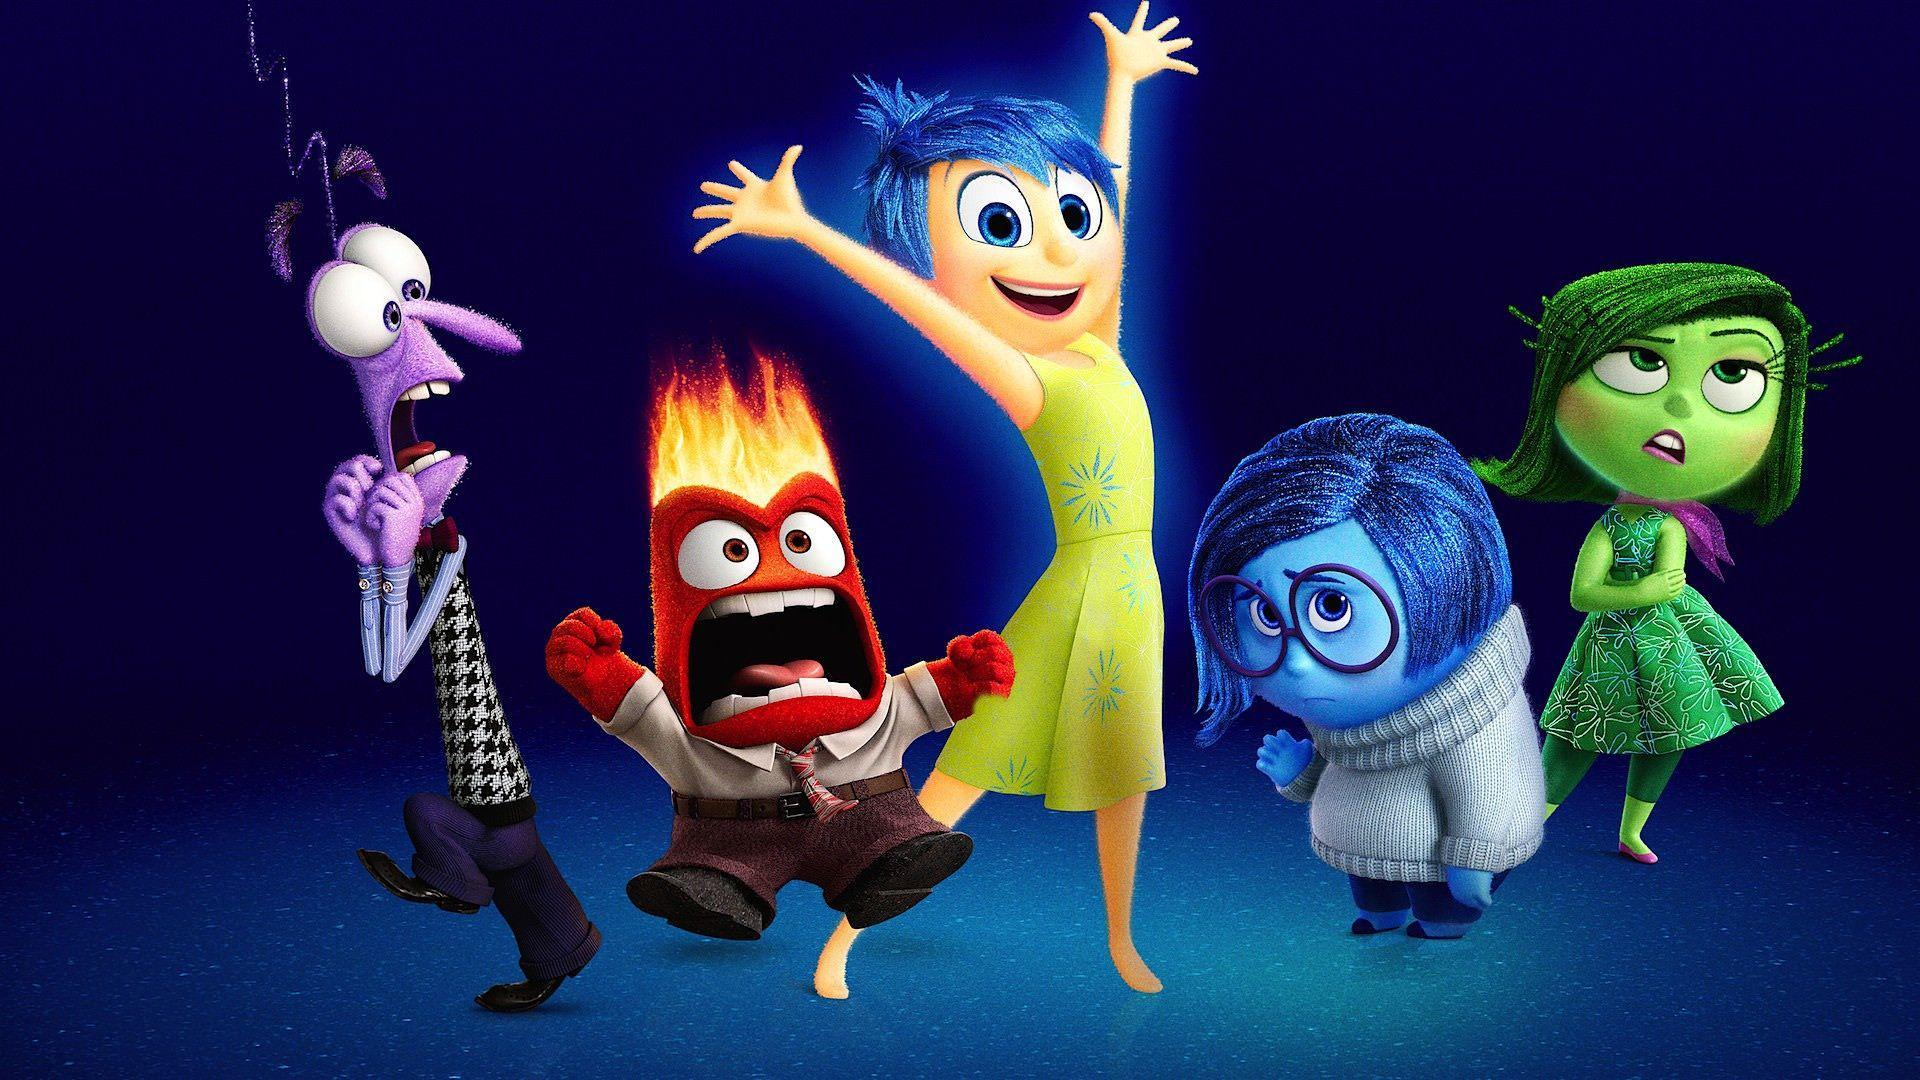 Inside Out Wallpaper High Quality